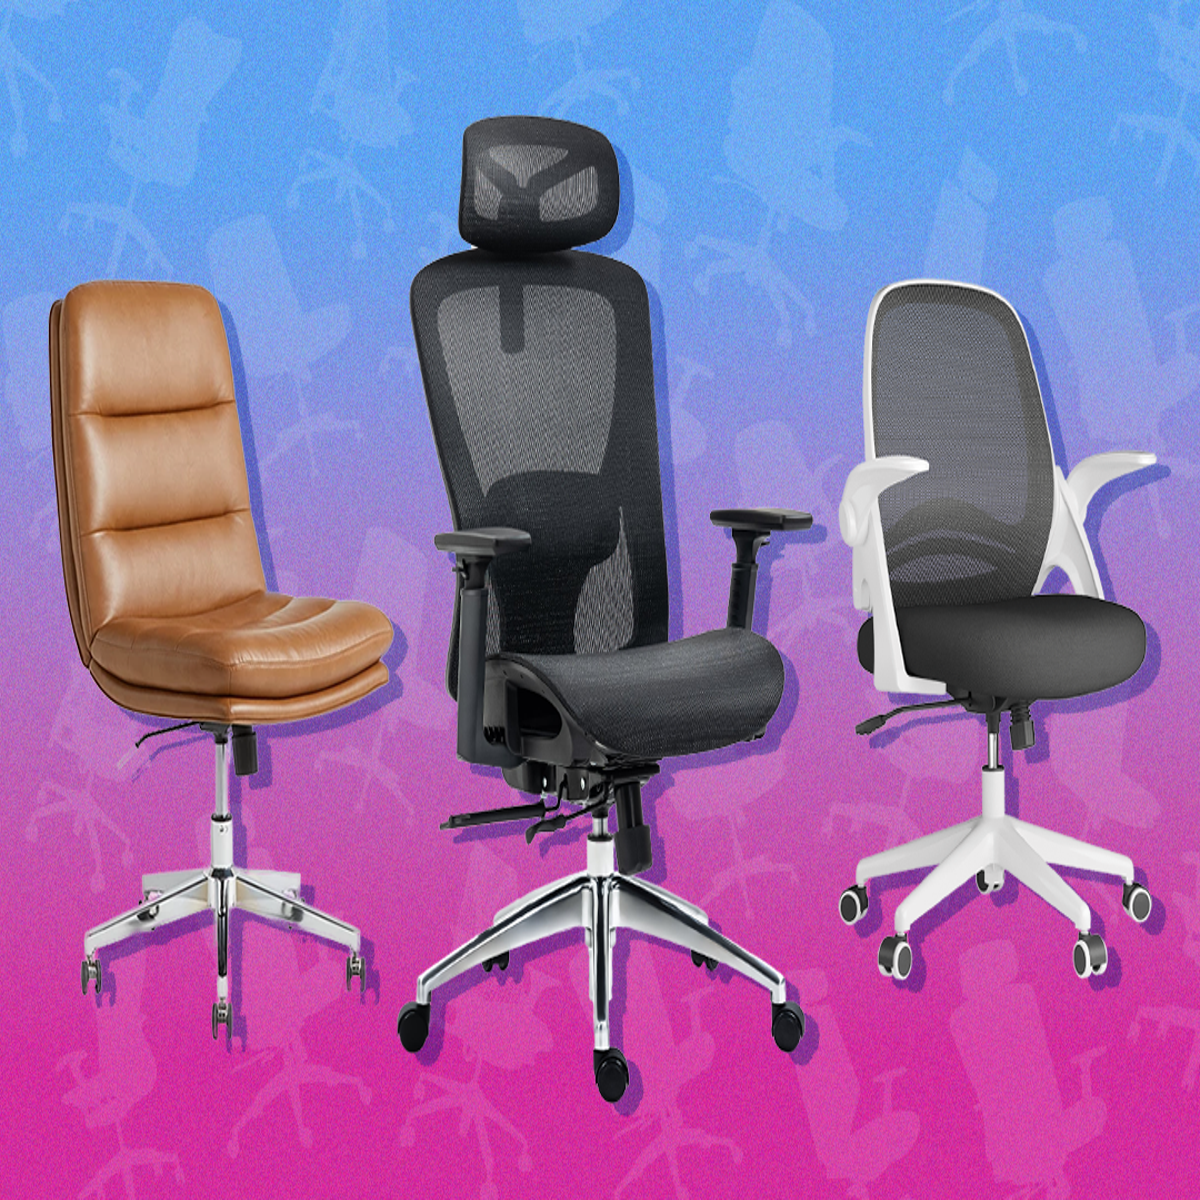 https://static.independent.co.uk/2023/11/06/14/best%20ergonomic%20office%20chairs.png?width=1200&height=1200&fit=crop